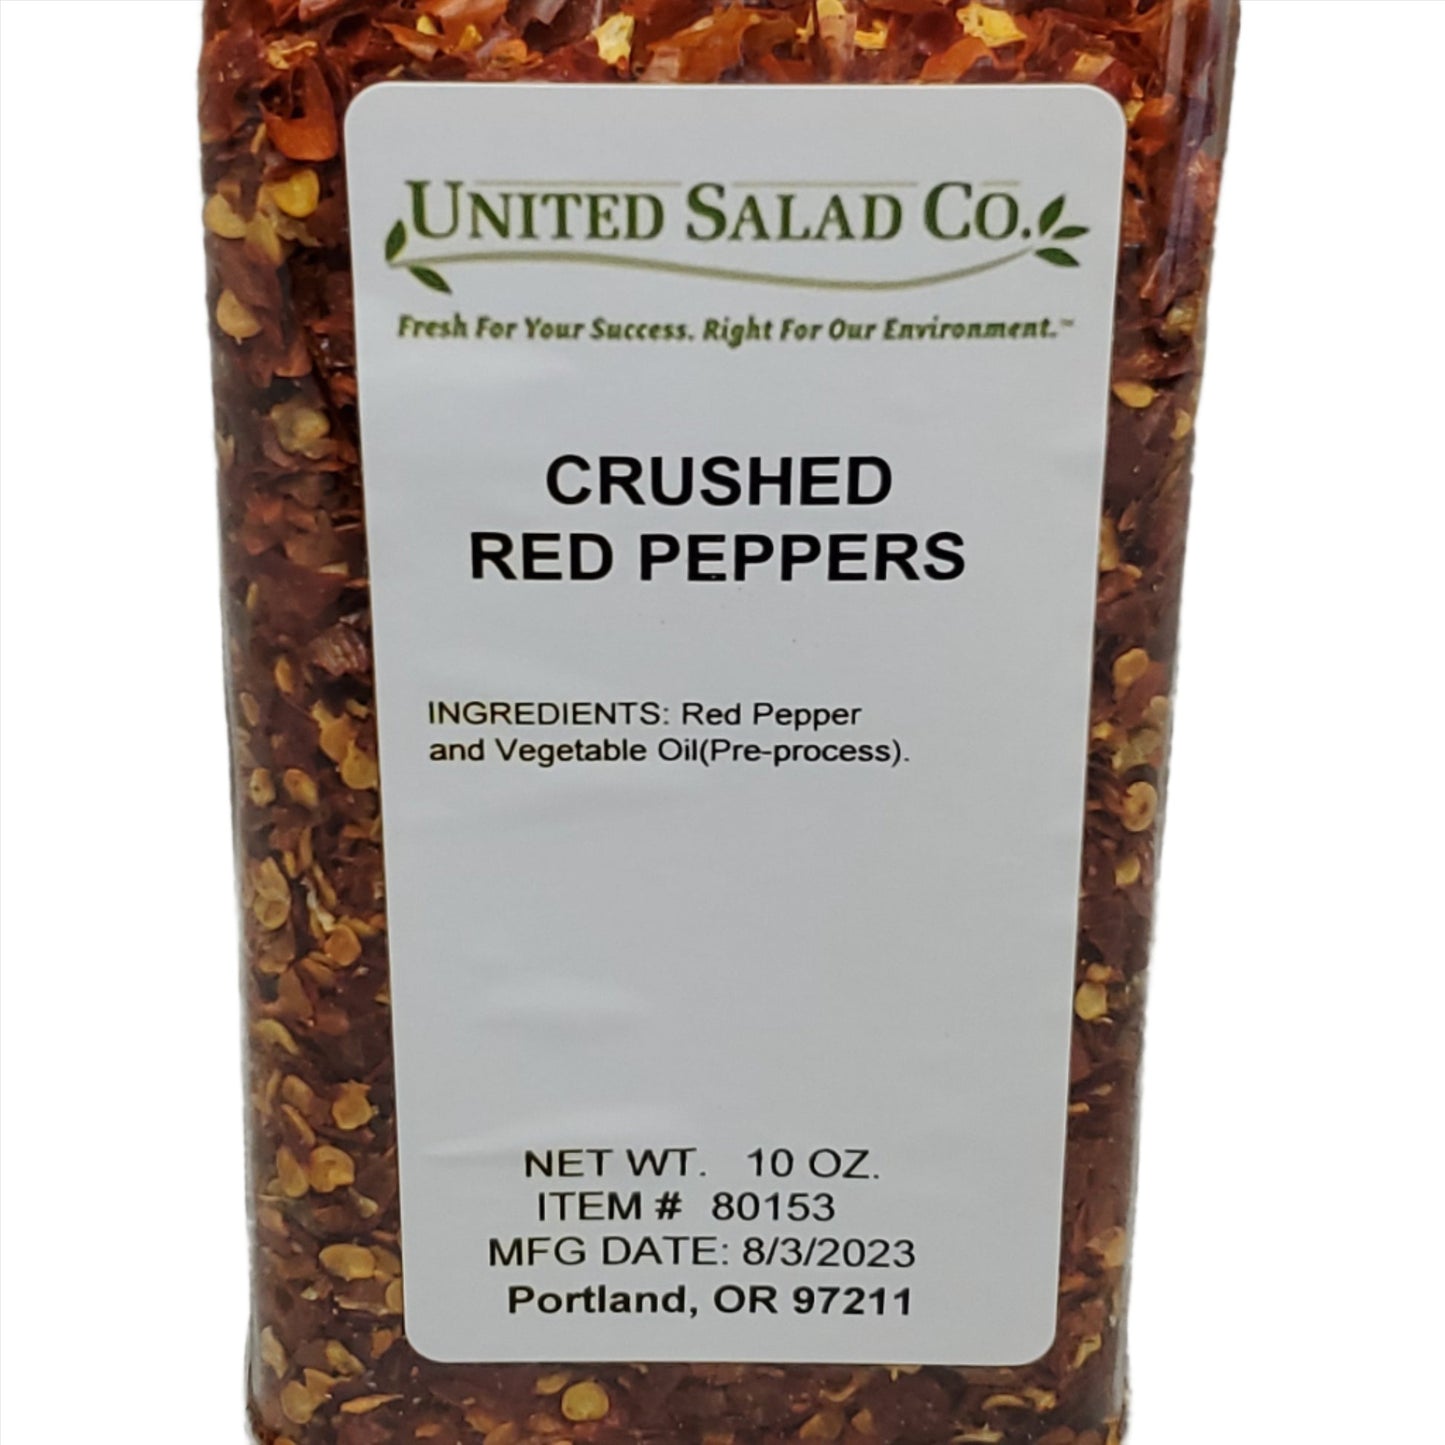 United Salad Co. Crushed Red Pepper 10 oz # 80153 Seasonings/ Spices Best By: 08/26